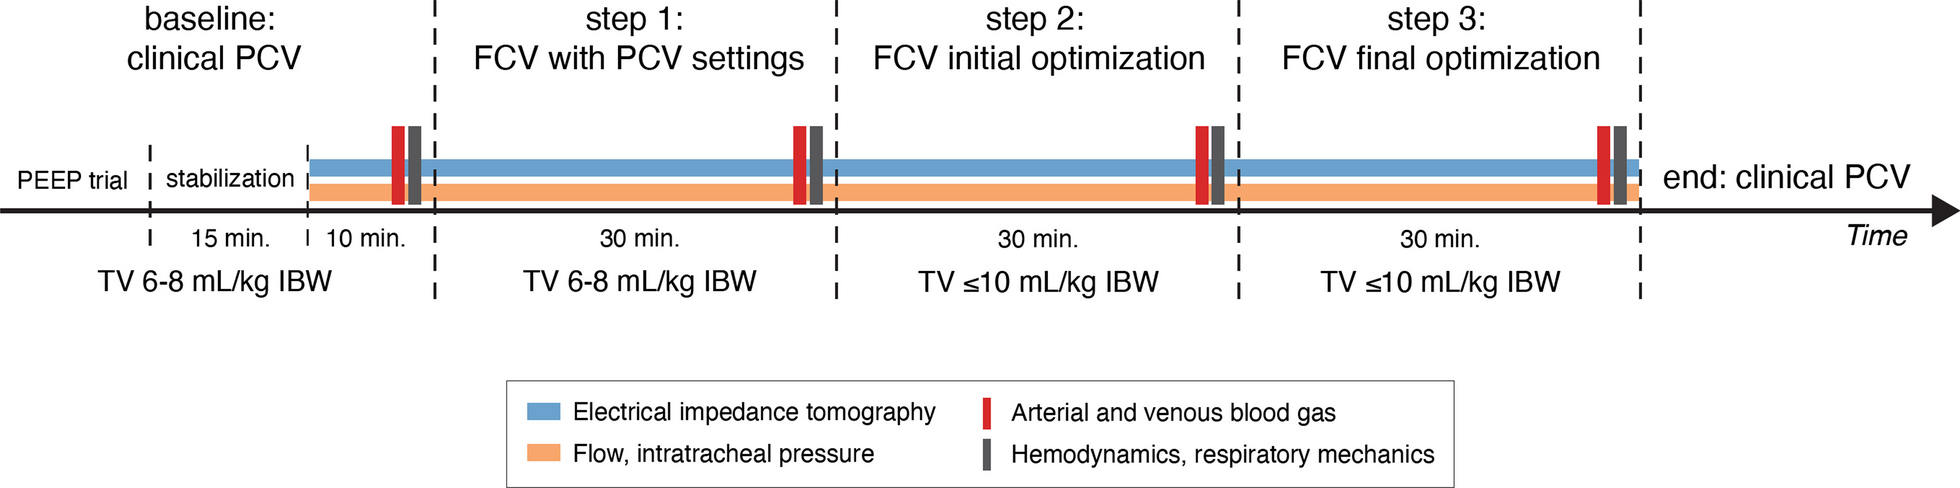 Flow-controlled ventilation decreases mechanical power in postoperative ICU patients